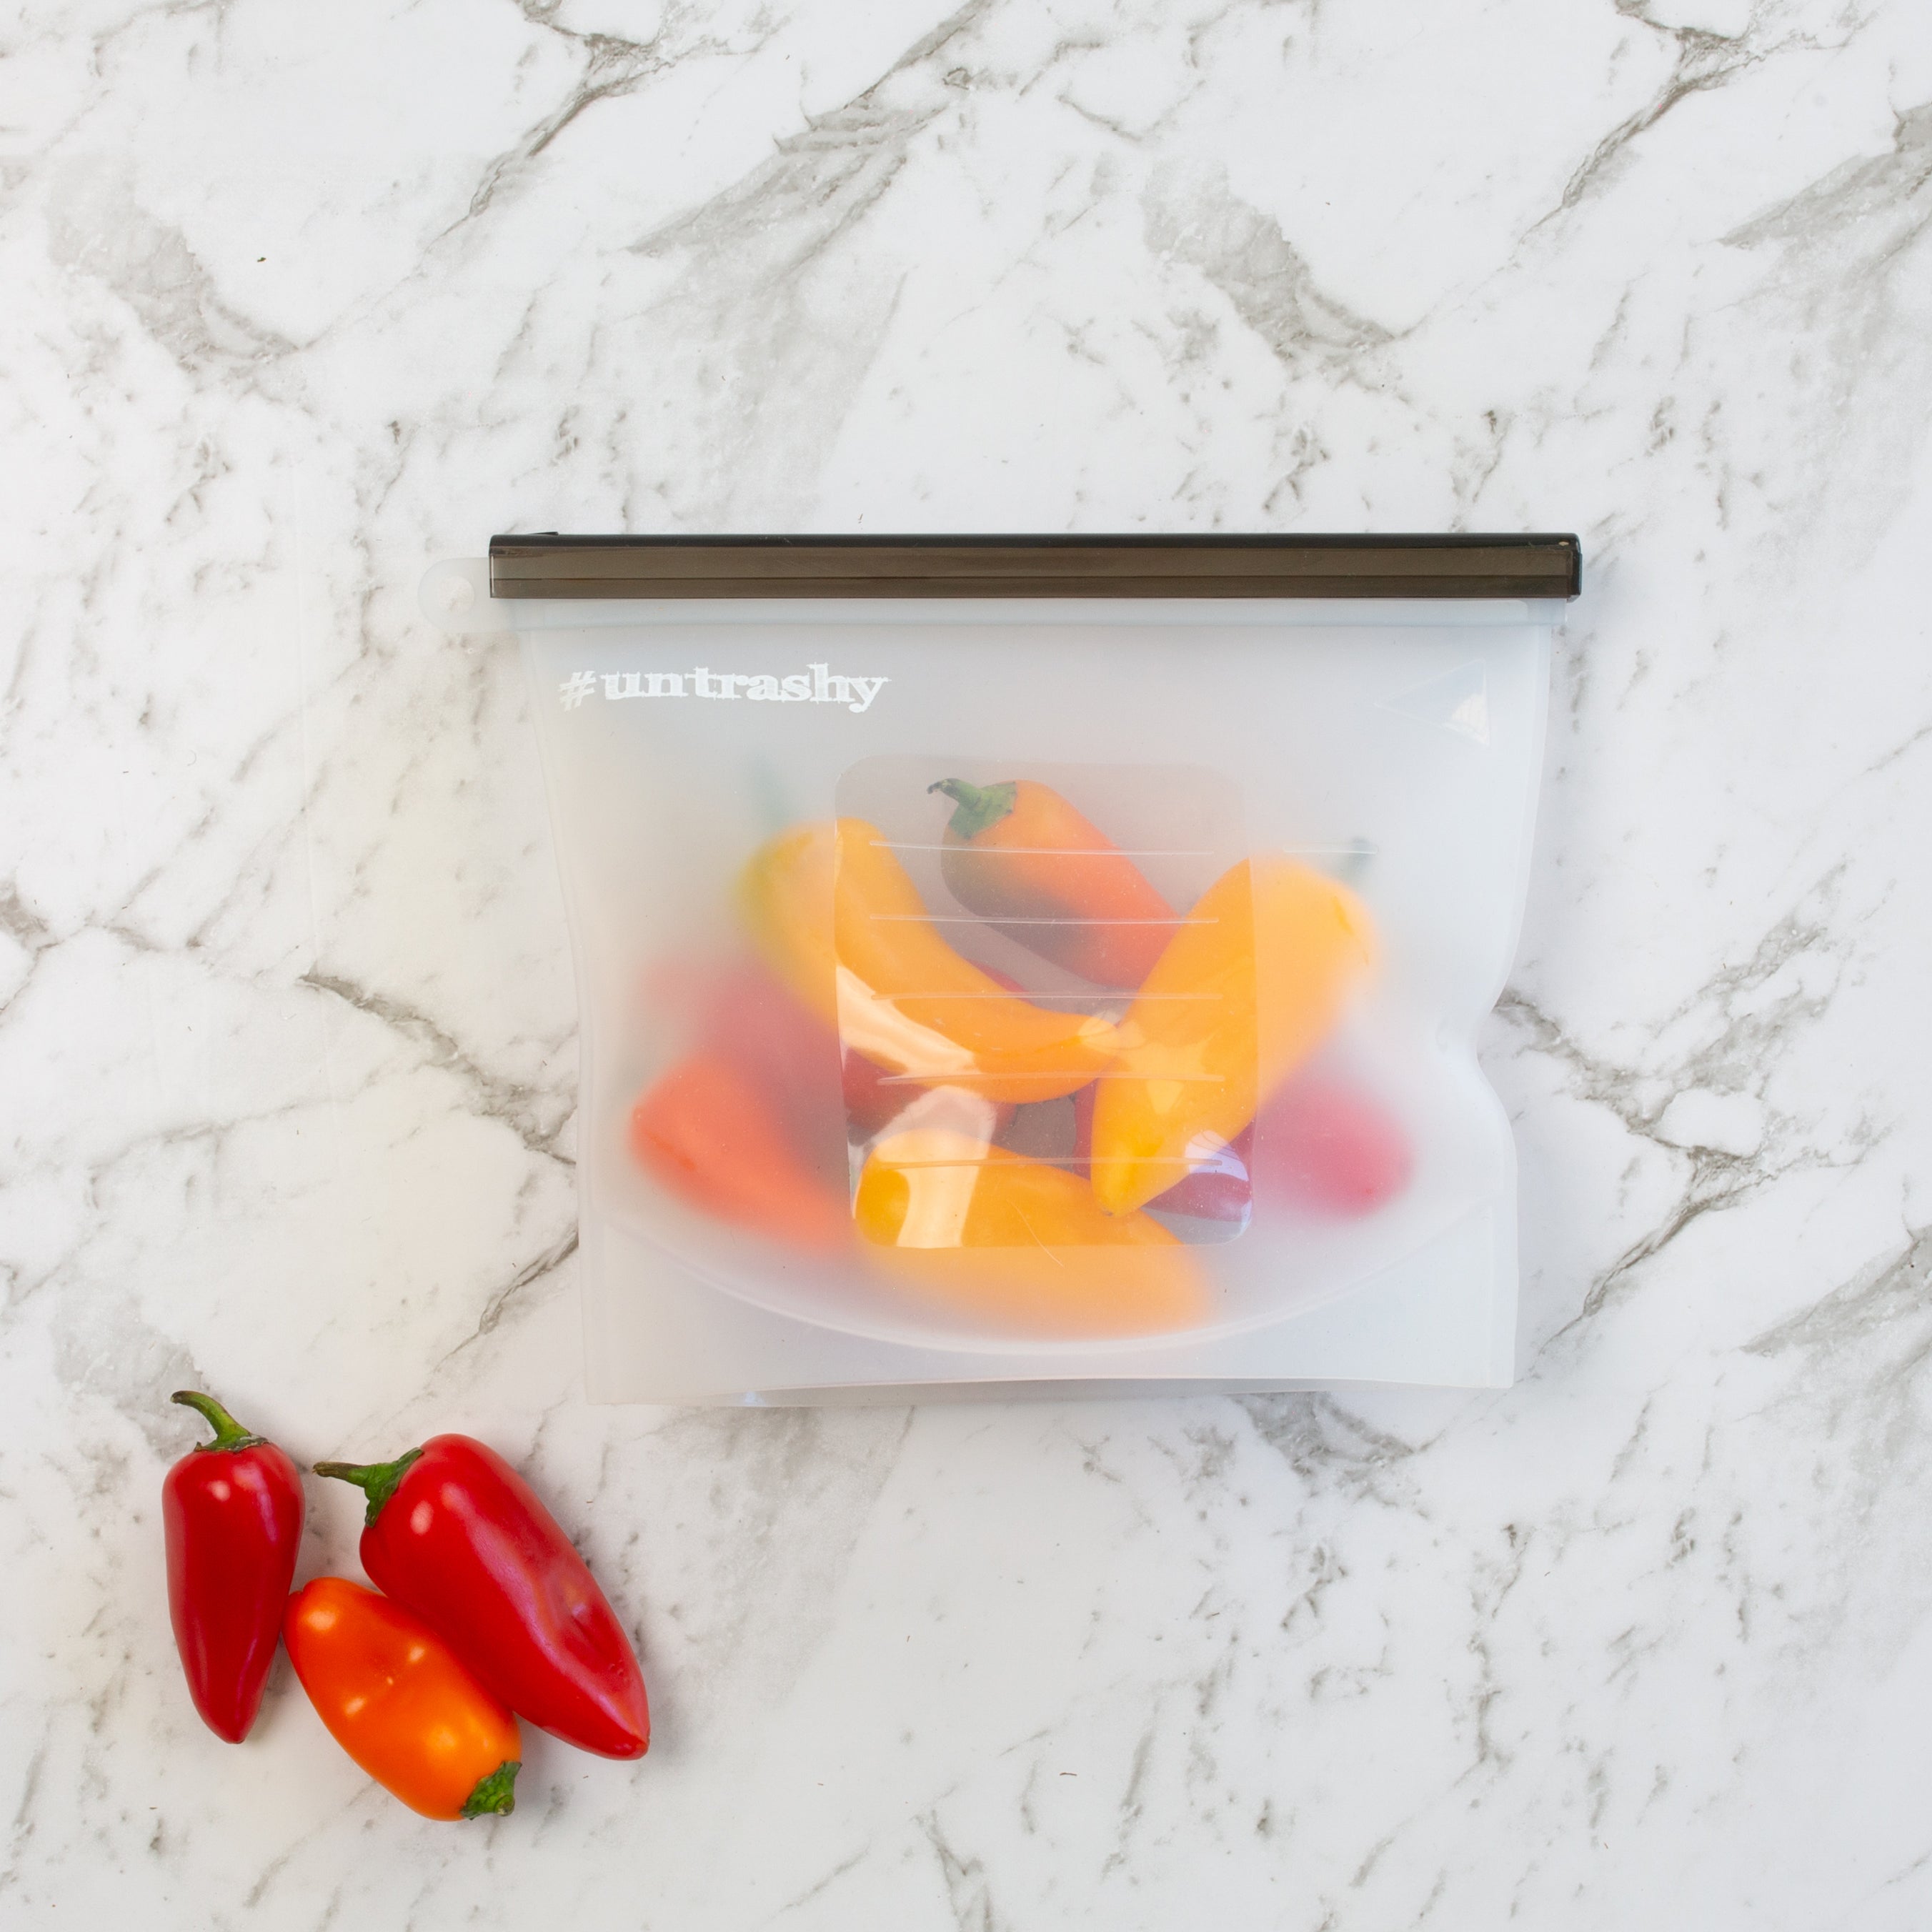 Silicone food pouch containing red and yellow chillis